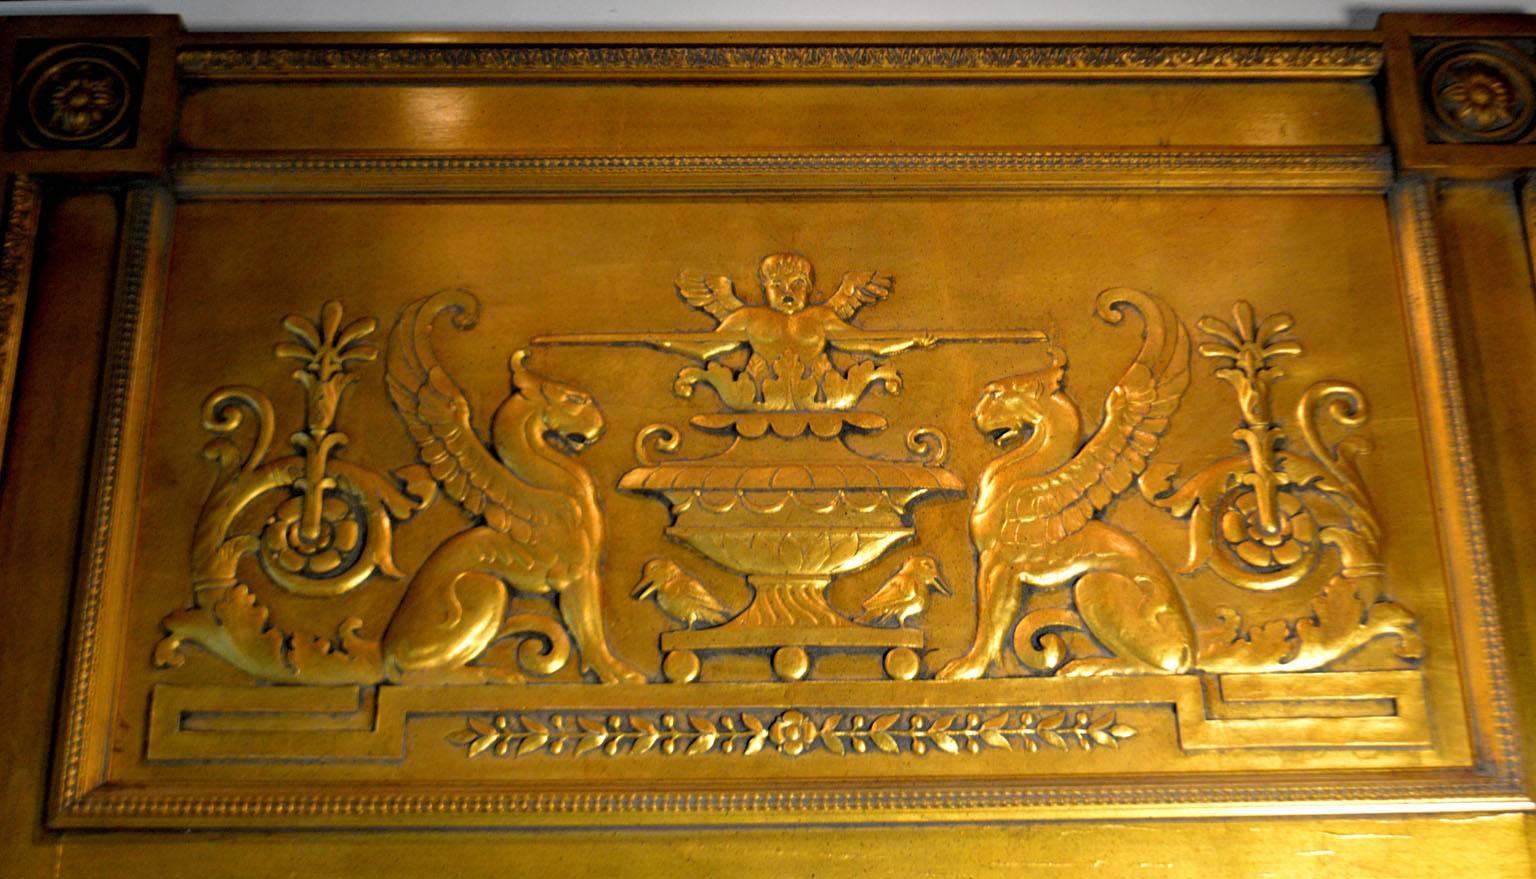 Empire-style giltwood looking glass, the frame with projecting floral block-carved corners surrounding a carved frieze panel depicting griffins flanking an urn issuing a putti figure, with the beveled rectangular plate below.